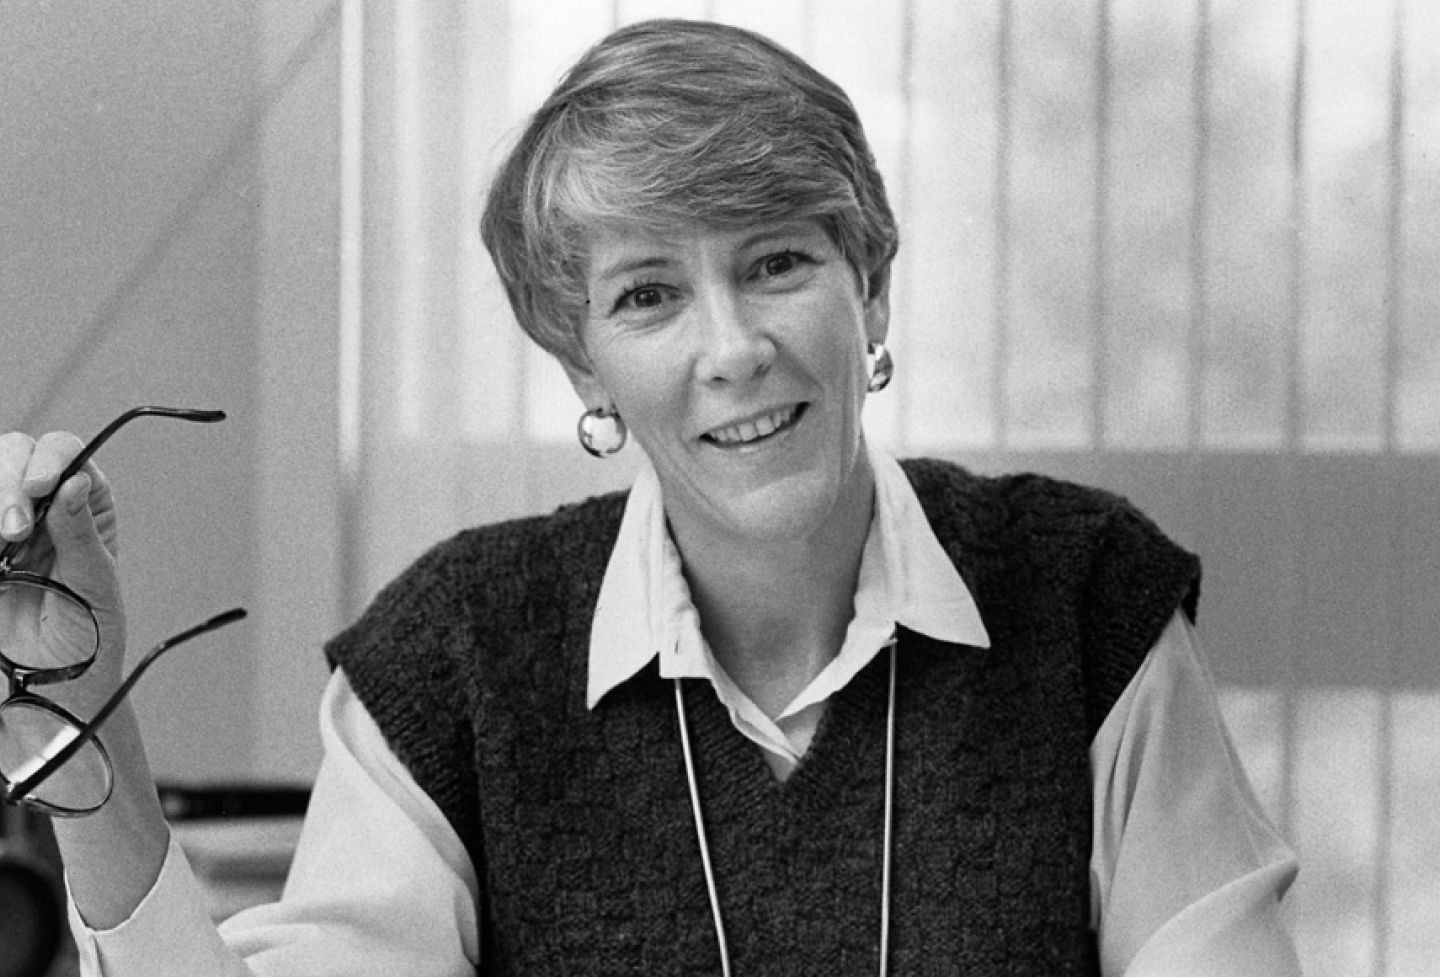 Professor Lillian R. BeVier, who joined the faculty in 1973, was the school’s first tenured female law professor (pictured in 1985). 